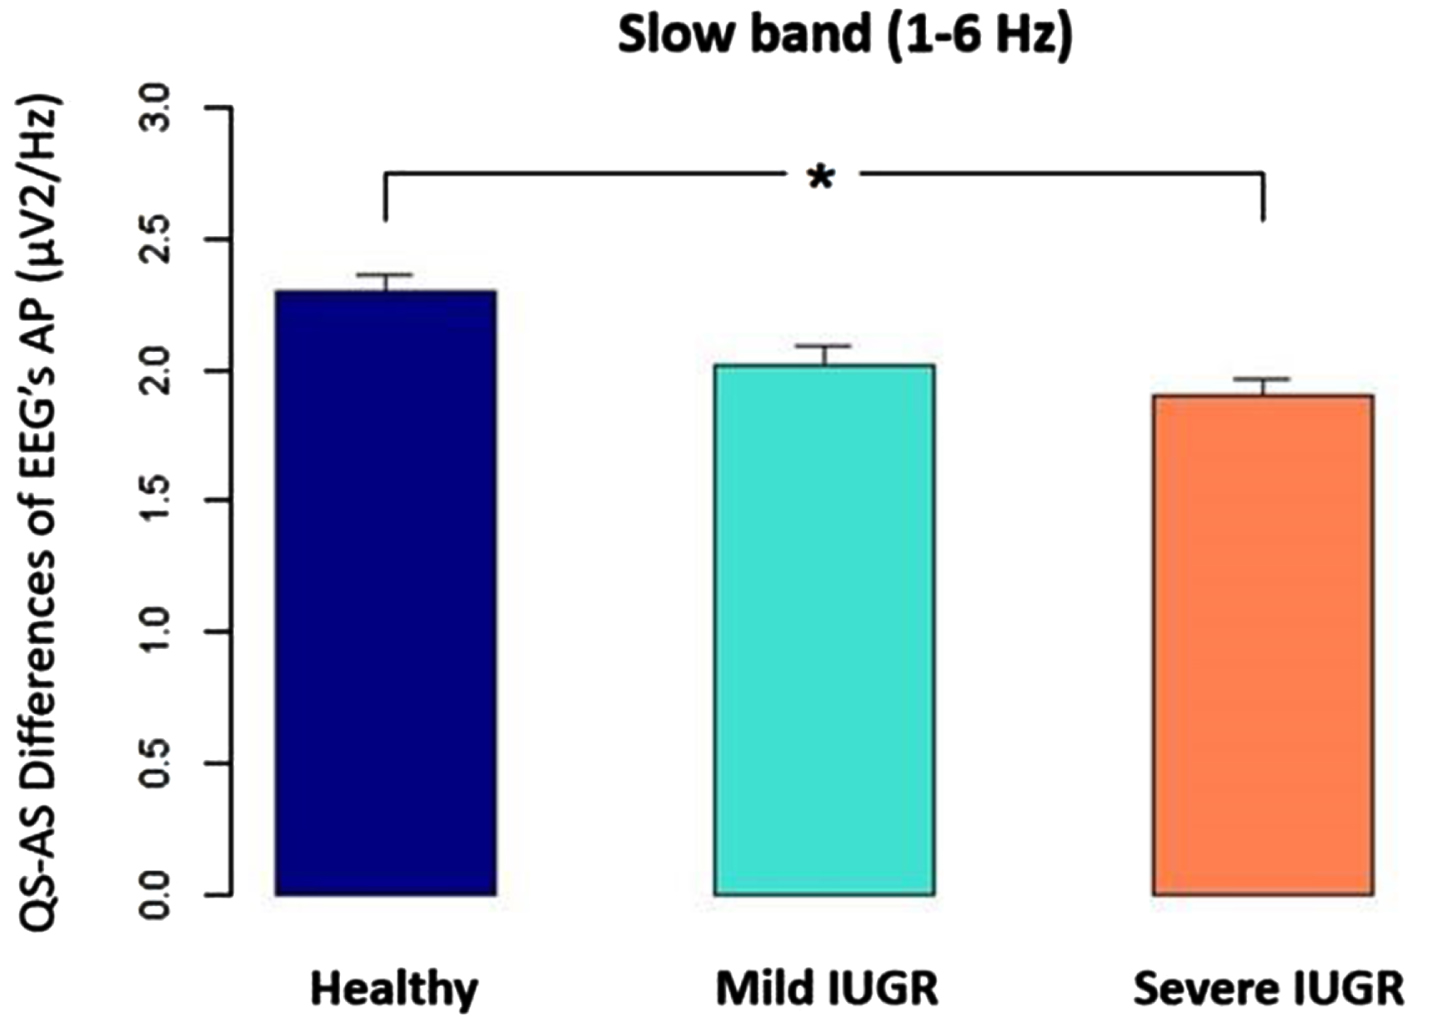 The difference between quiet sleep (QS) and active sleep (AS), measured as absolute power (AP) for the EEG’ slow band (1-6 Hz) was significantly higher in healthy newborns than in the IUGR severe group (p<0.05).